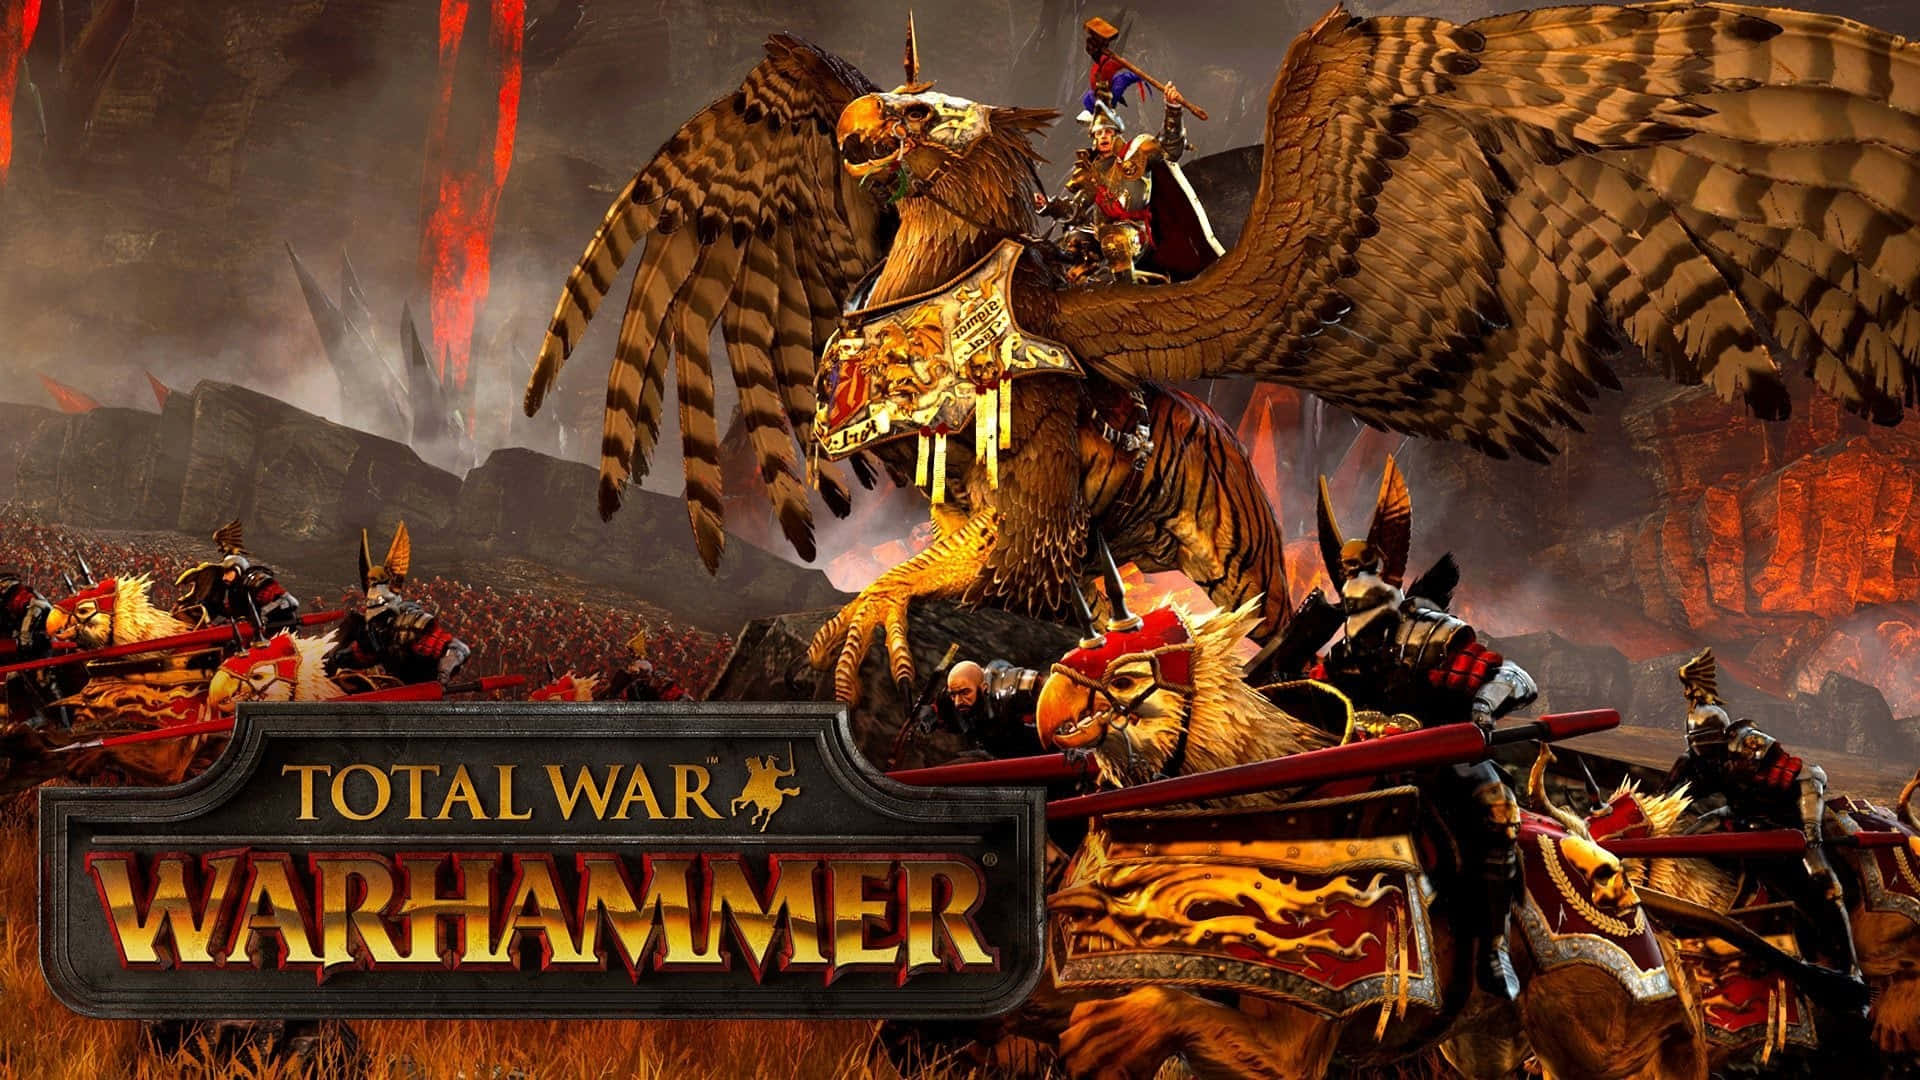 Experience the Ancient War Between Chaos and Order with Best Total War Warhammer